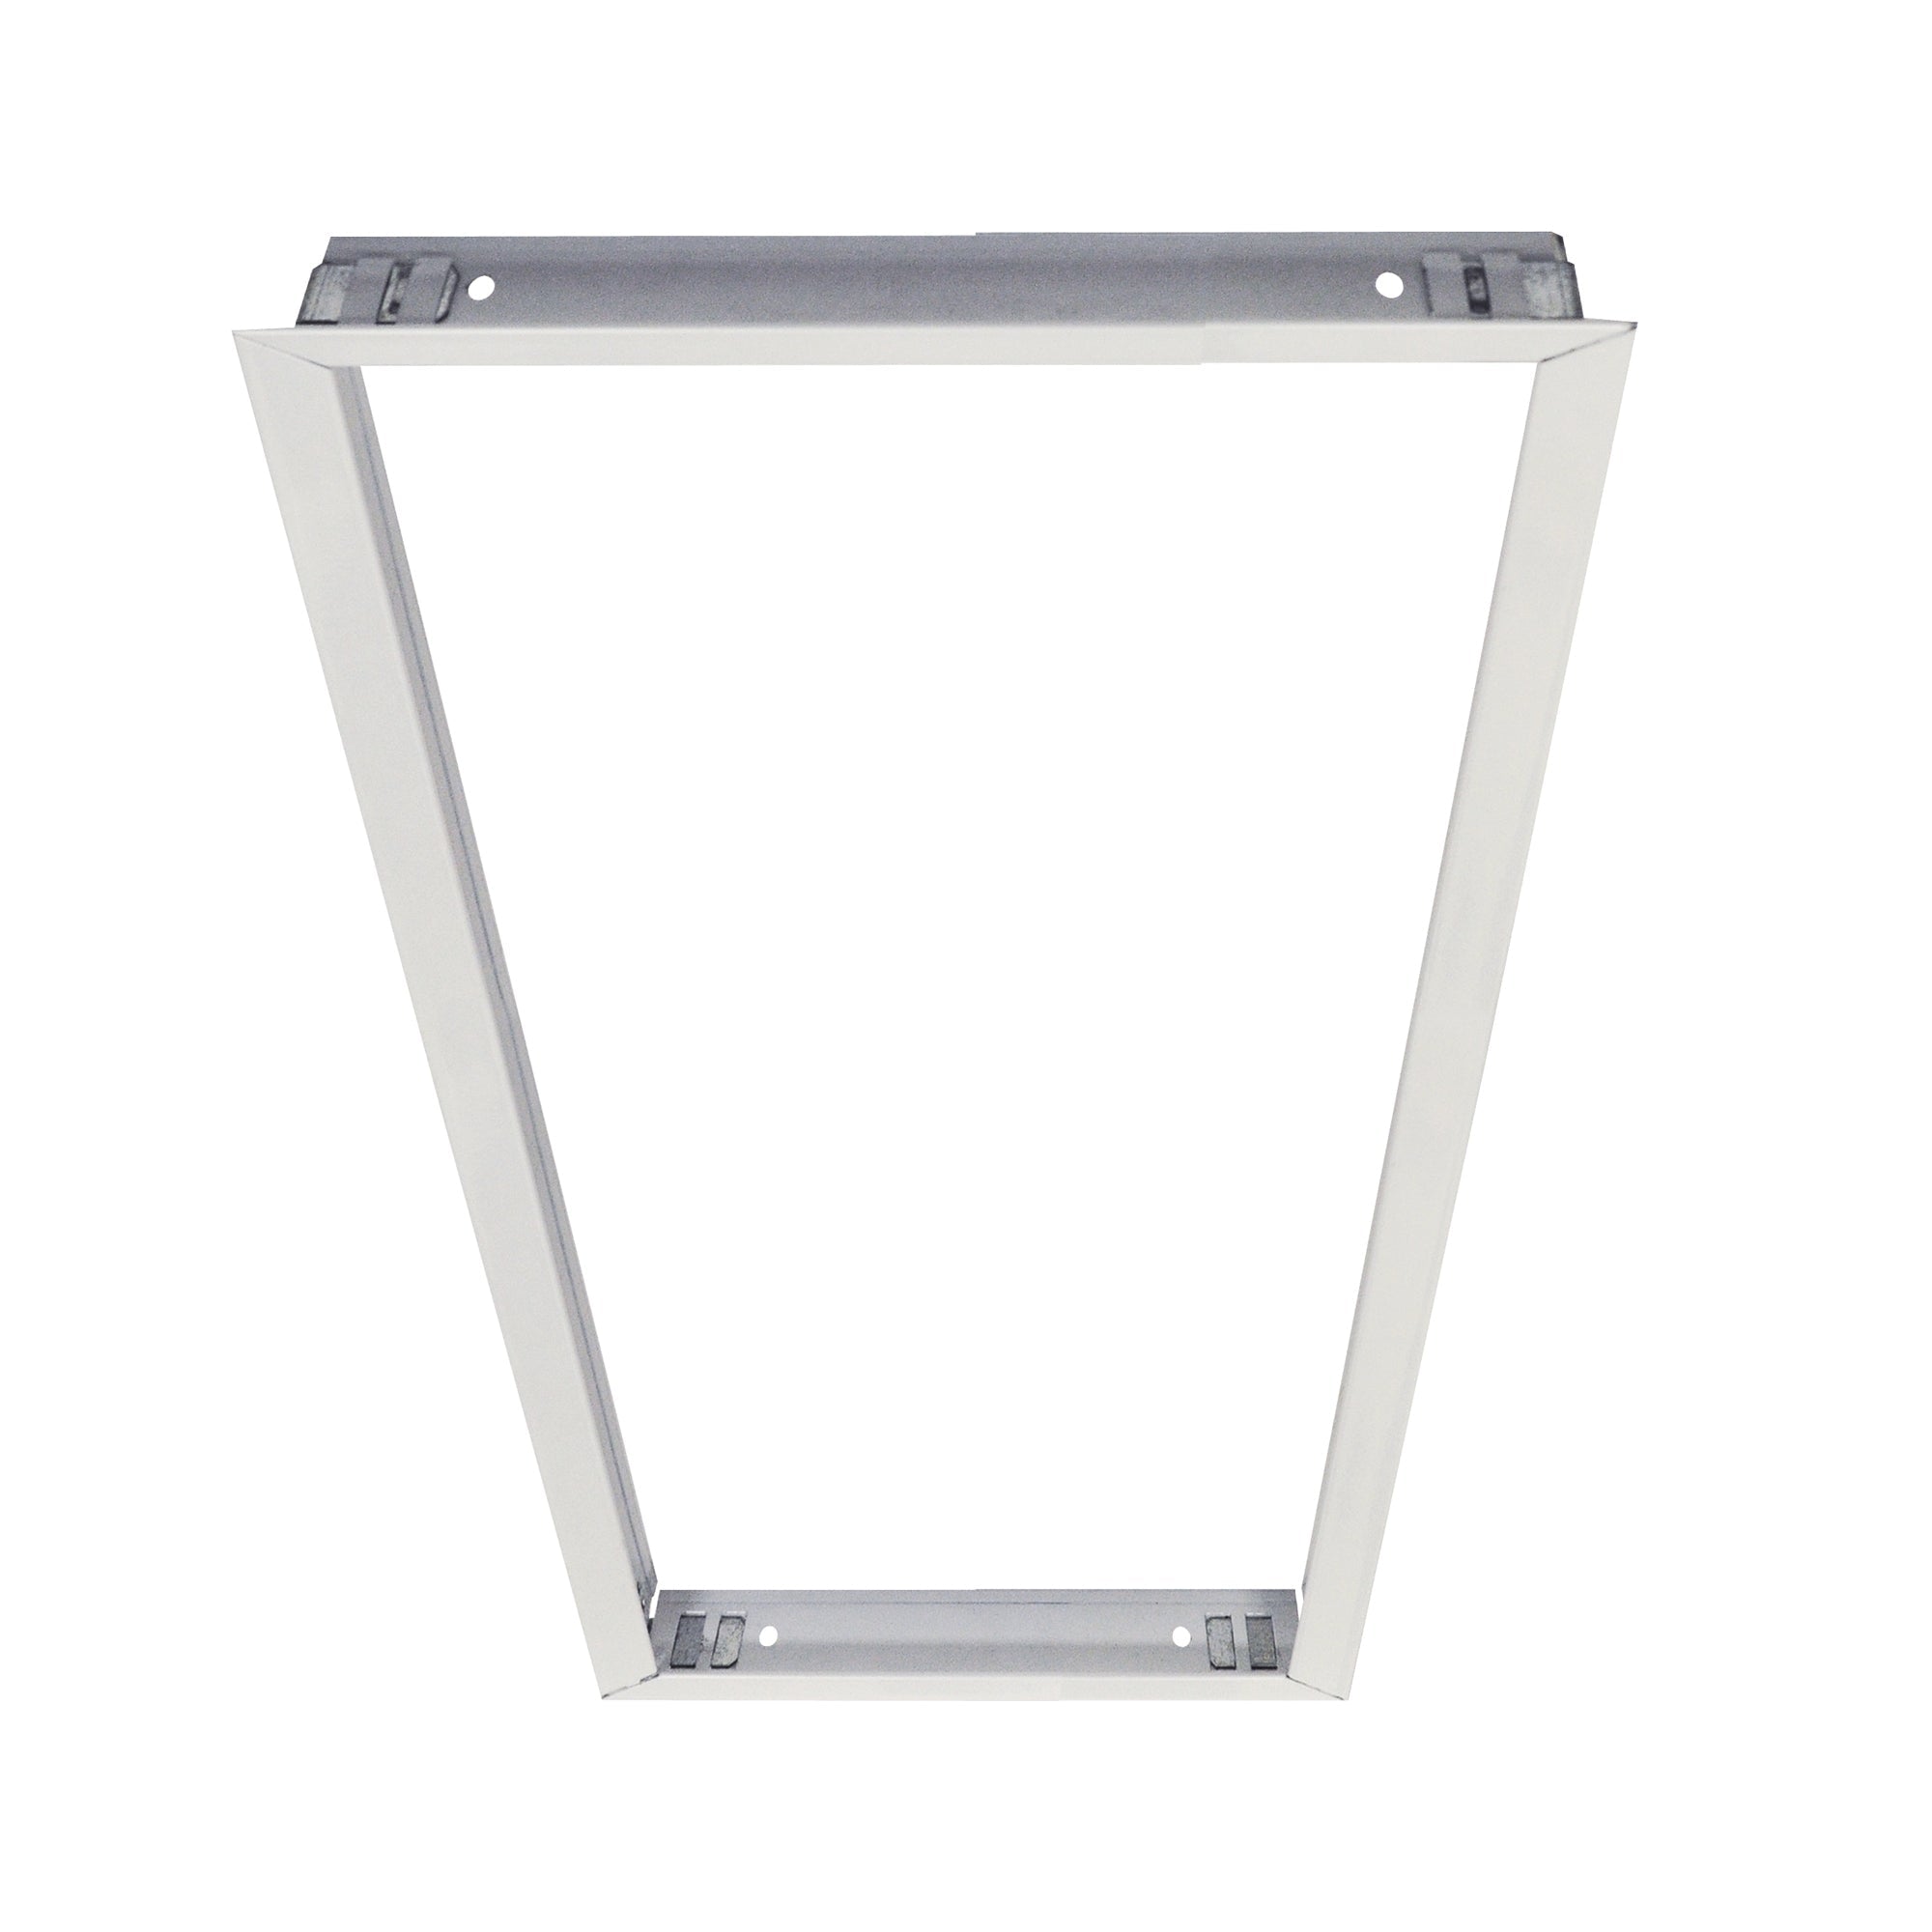 Nora Lighting NPDBL-14RFK/W - Recessed - Recessed Mounting Kit for 1'x4' LED Backlit Panels